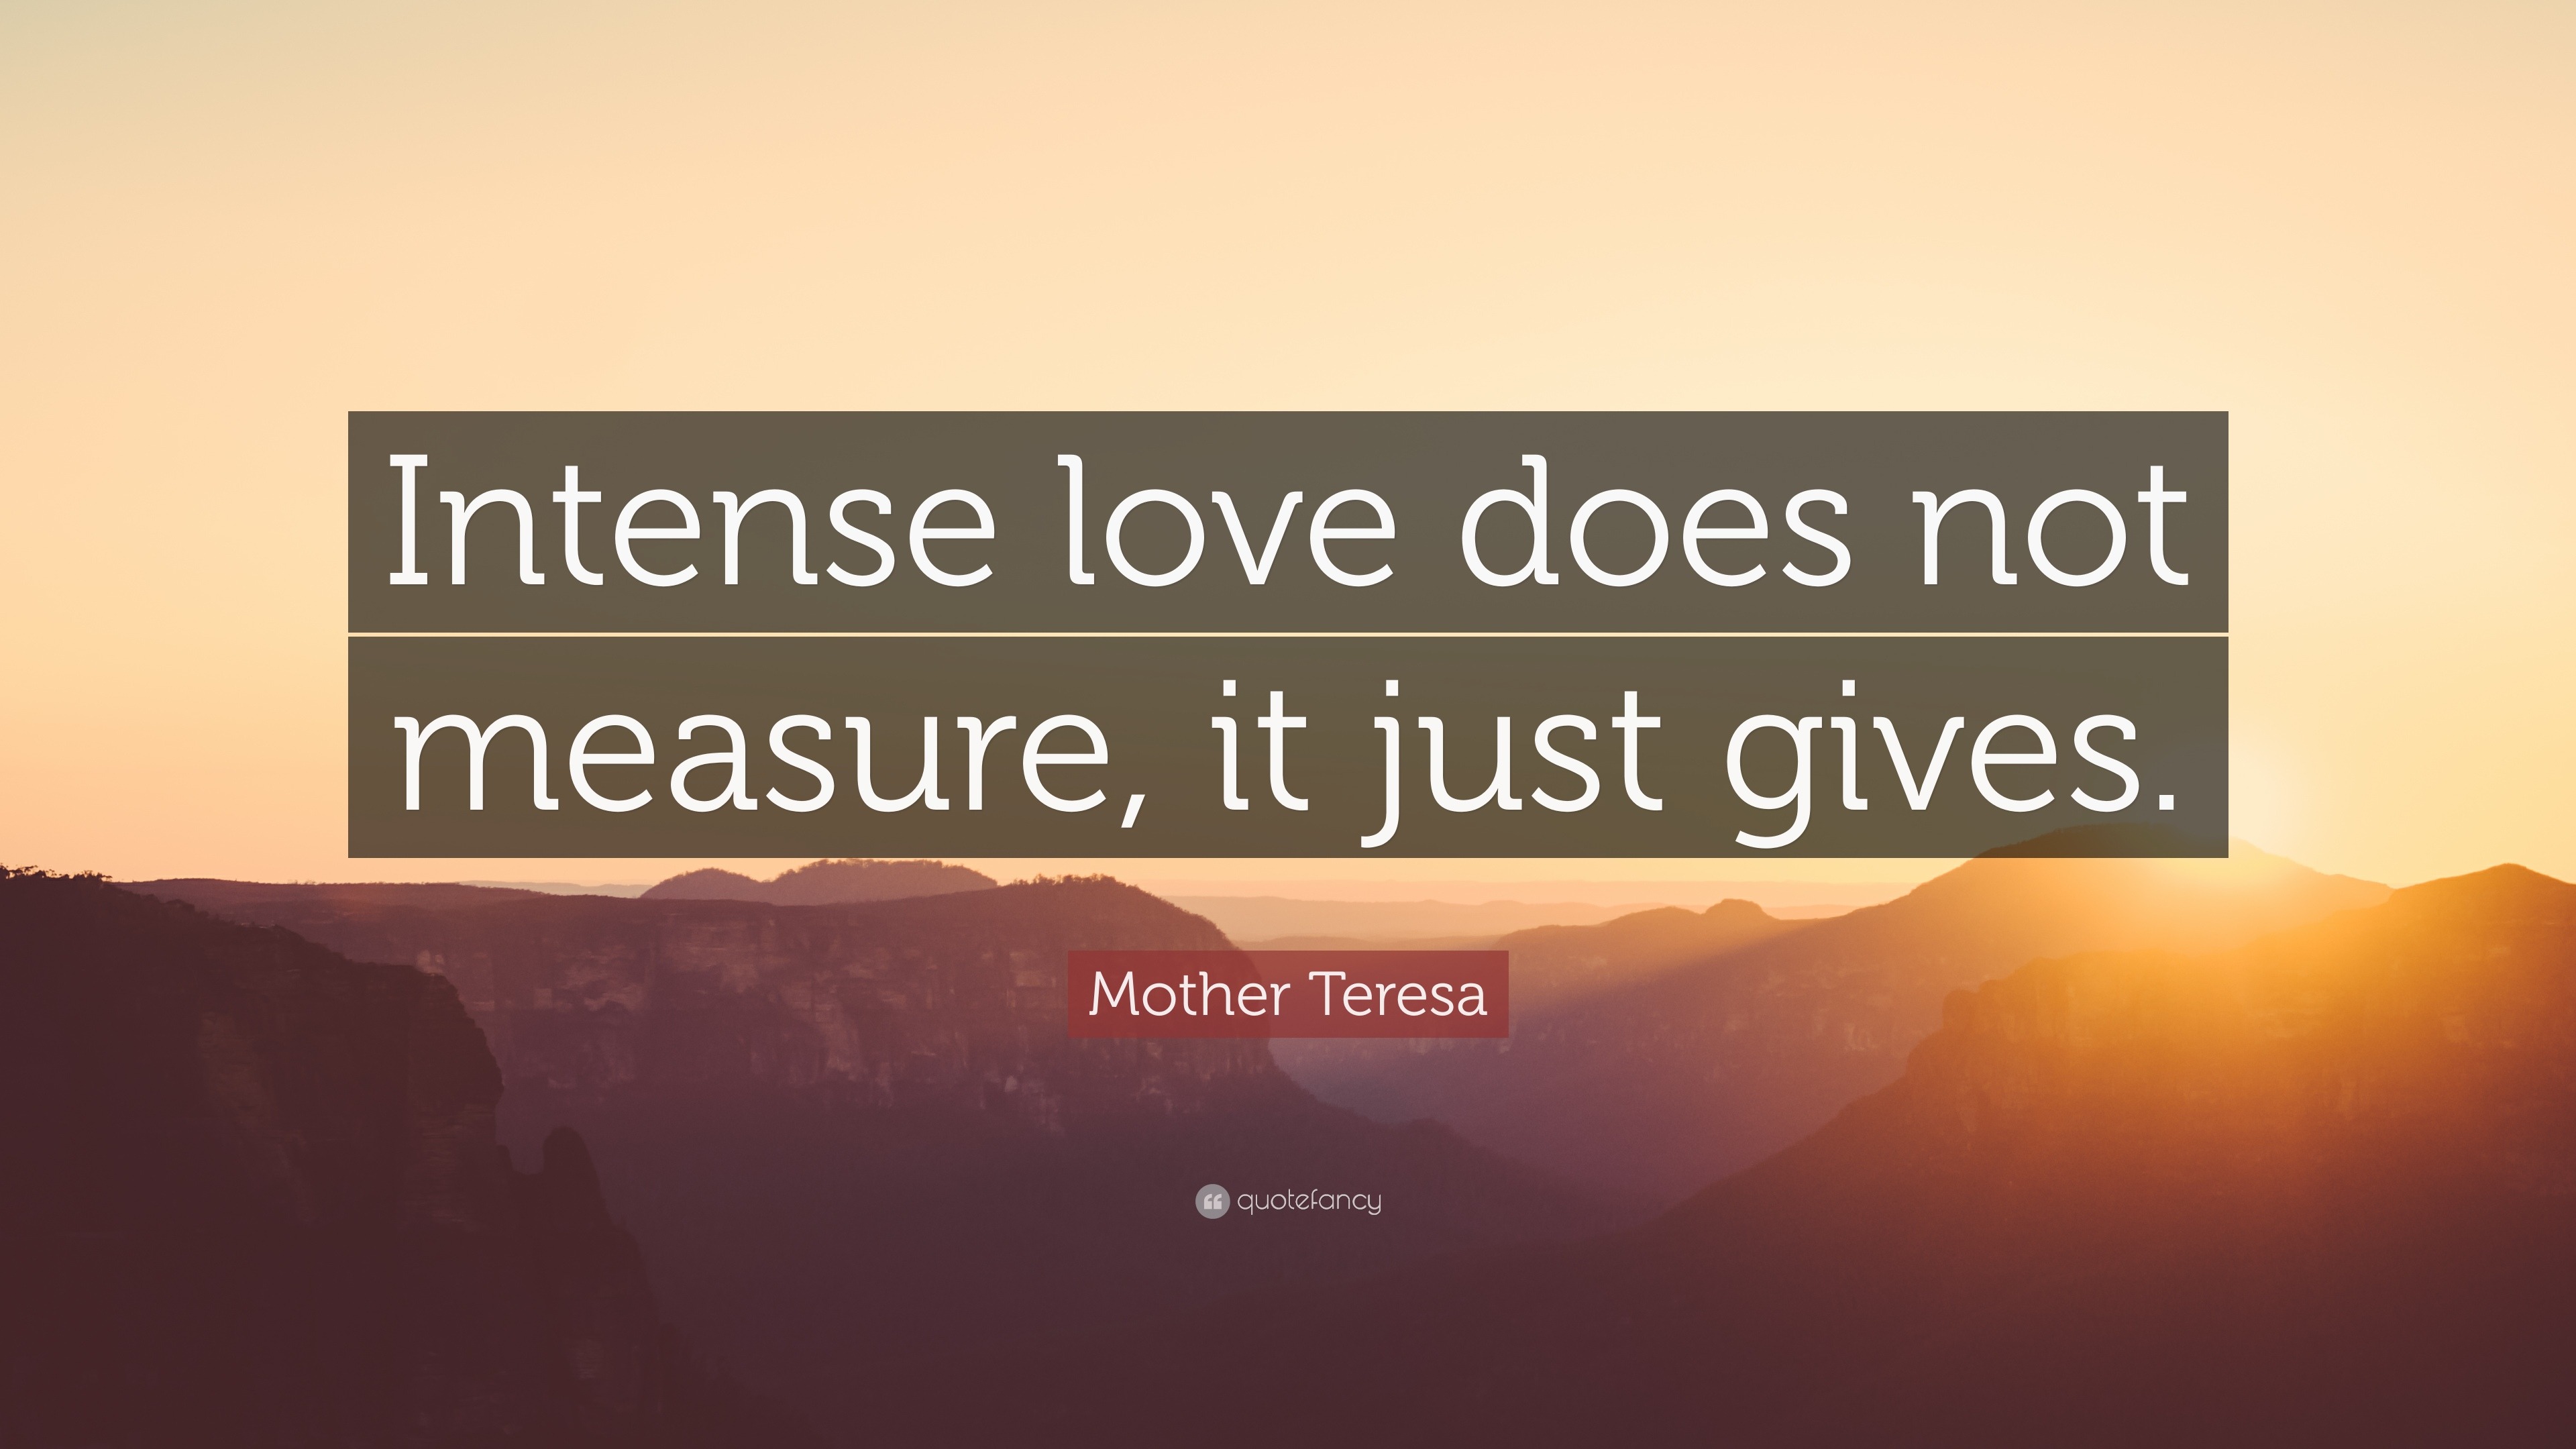 31443 Mother Teresa Quote Intense love does not measure it just gives